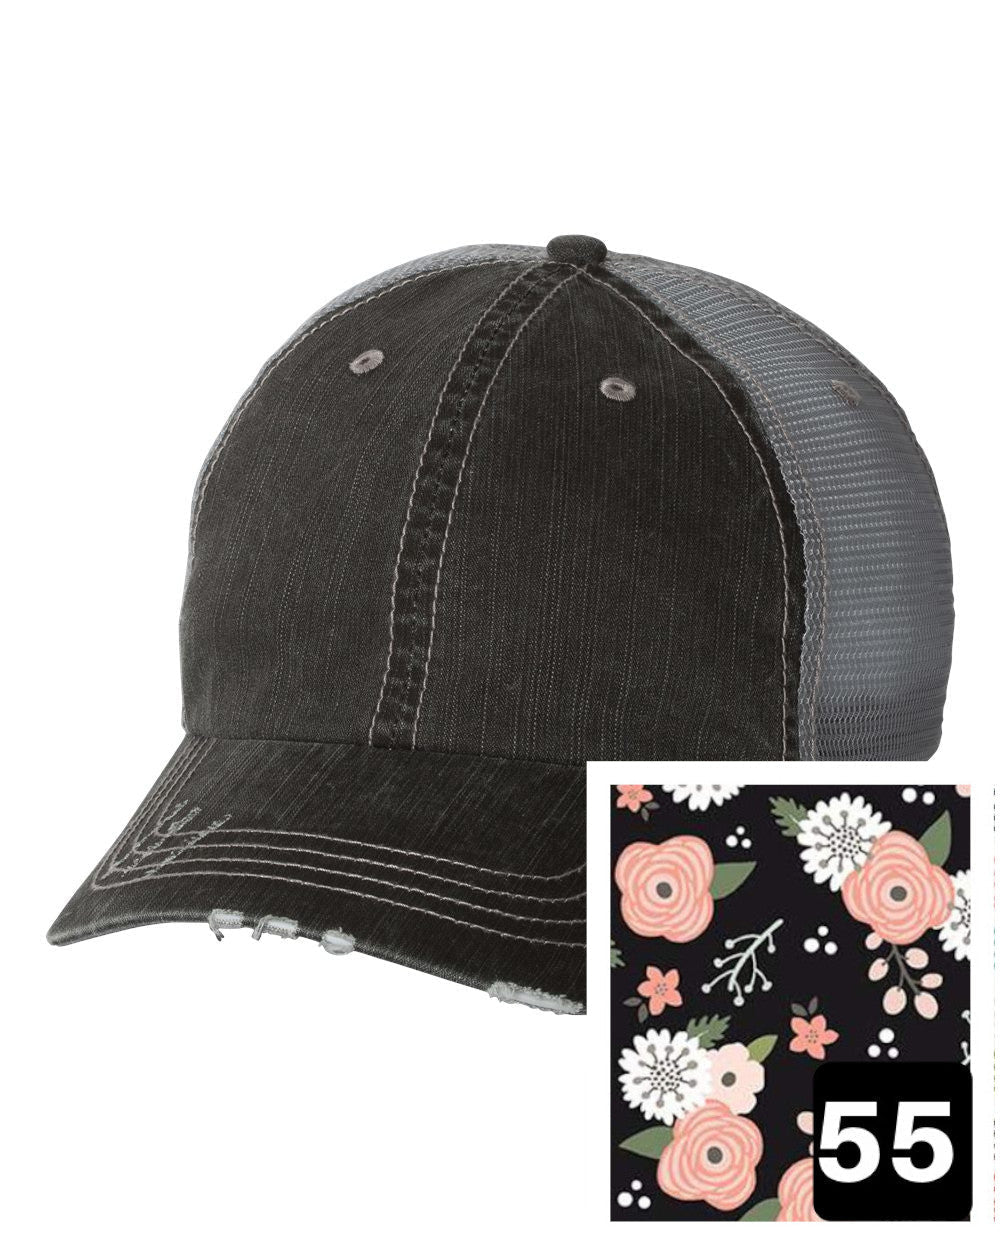 gray distressed trucker hat with petite floral on navy fabric state of Mississippi